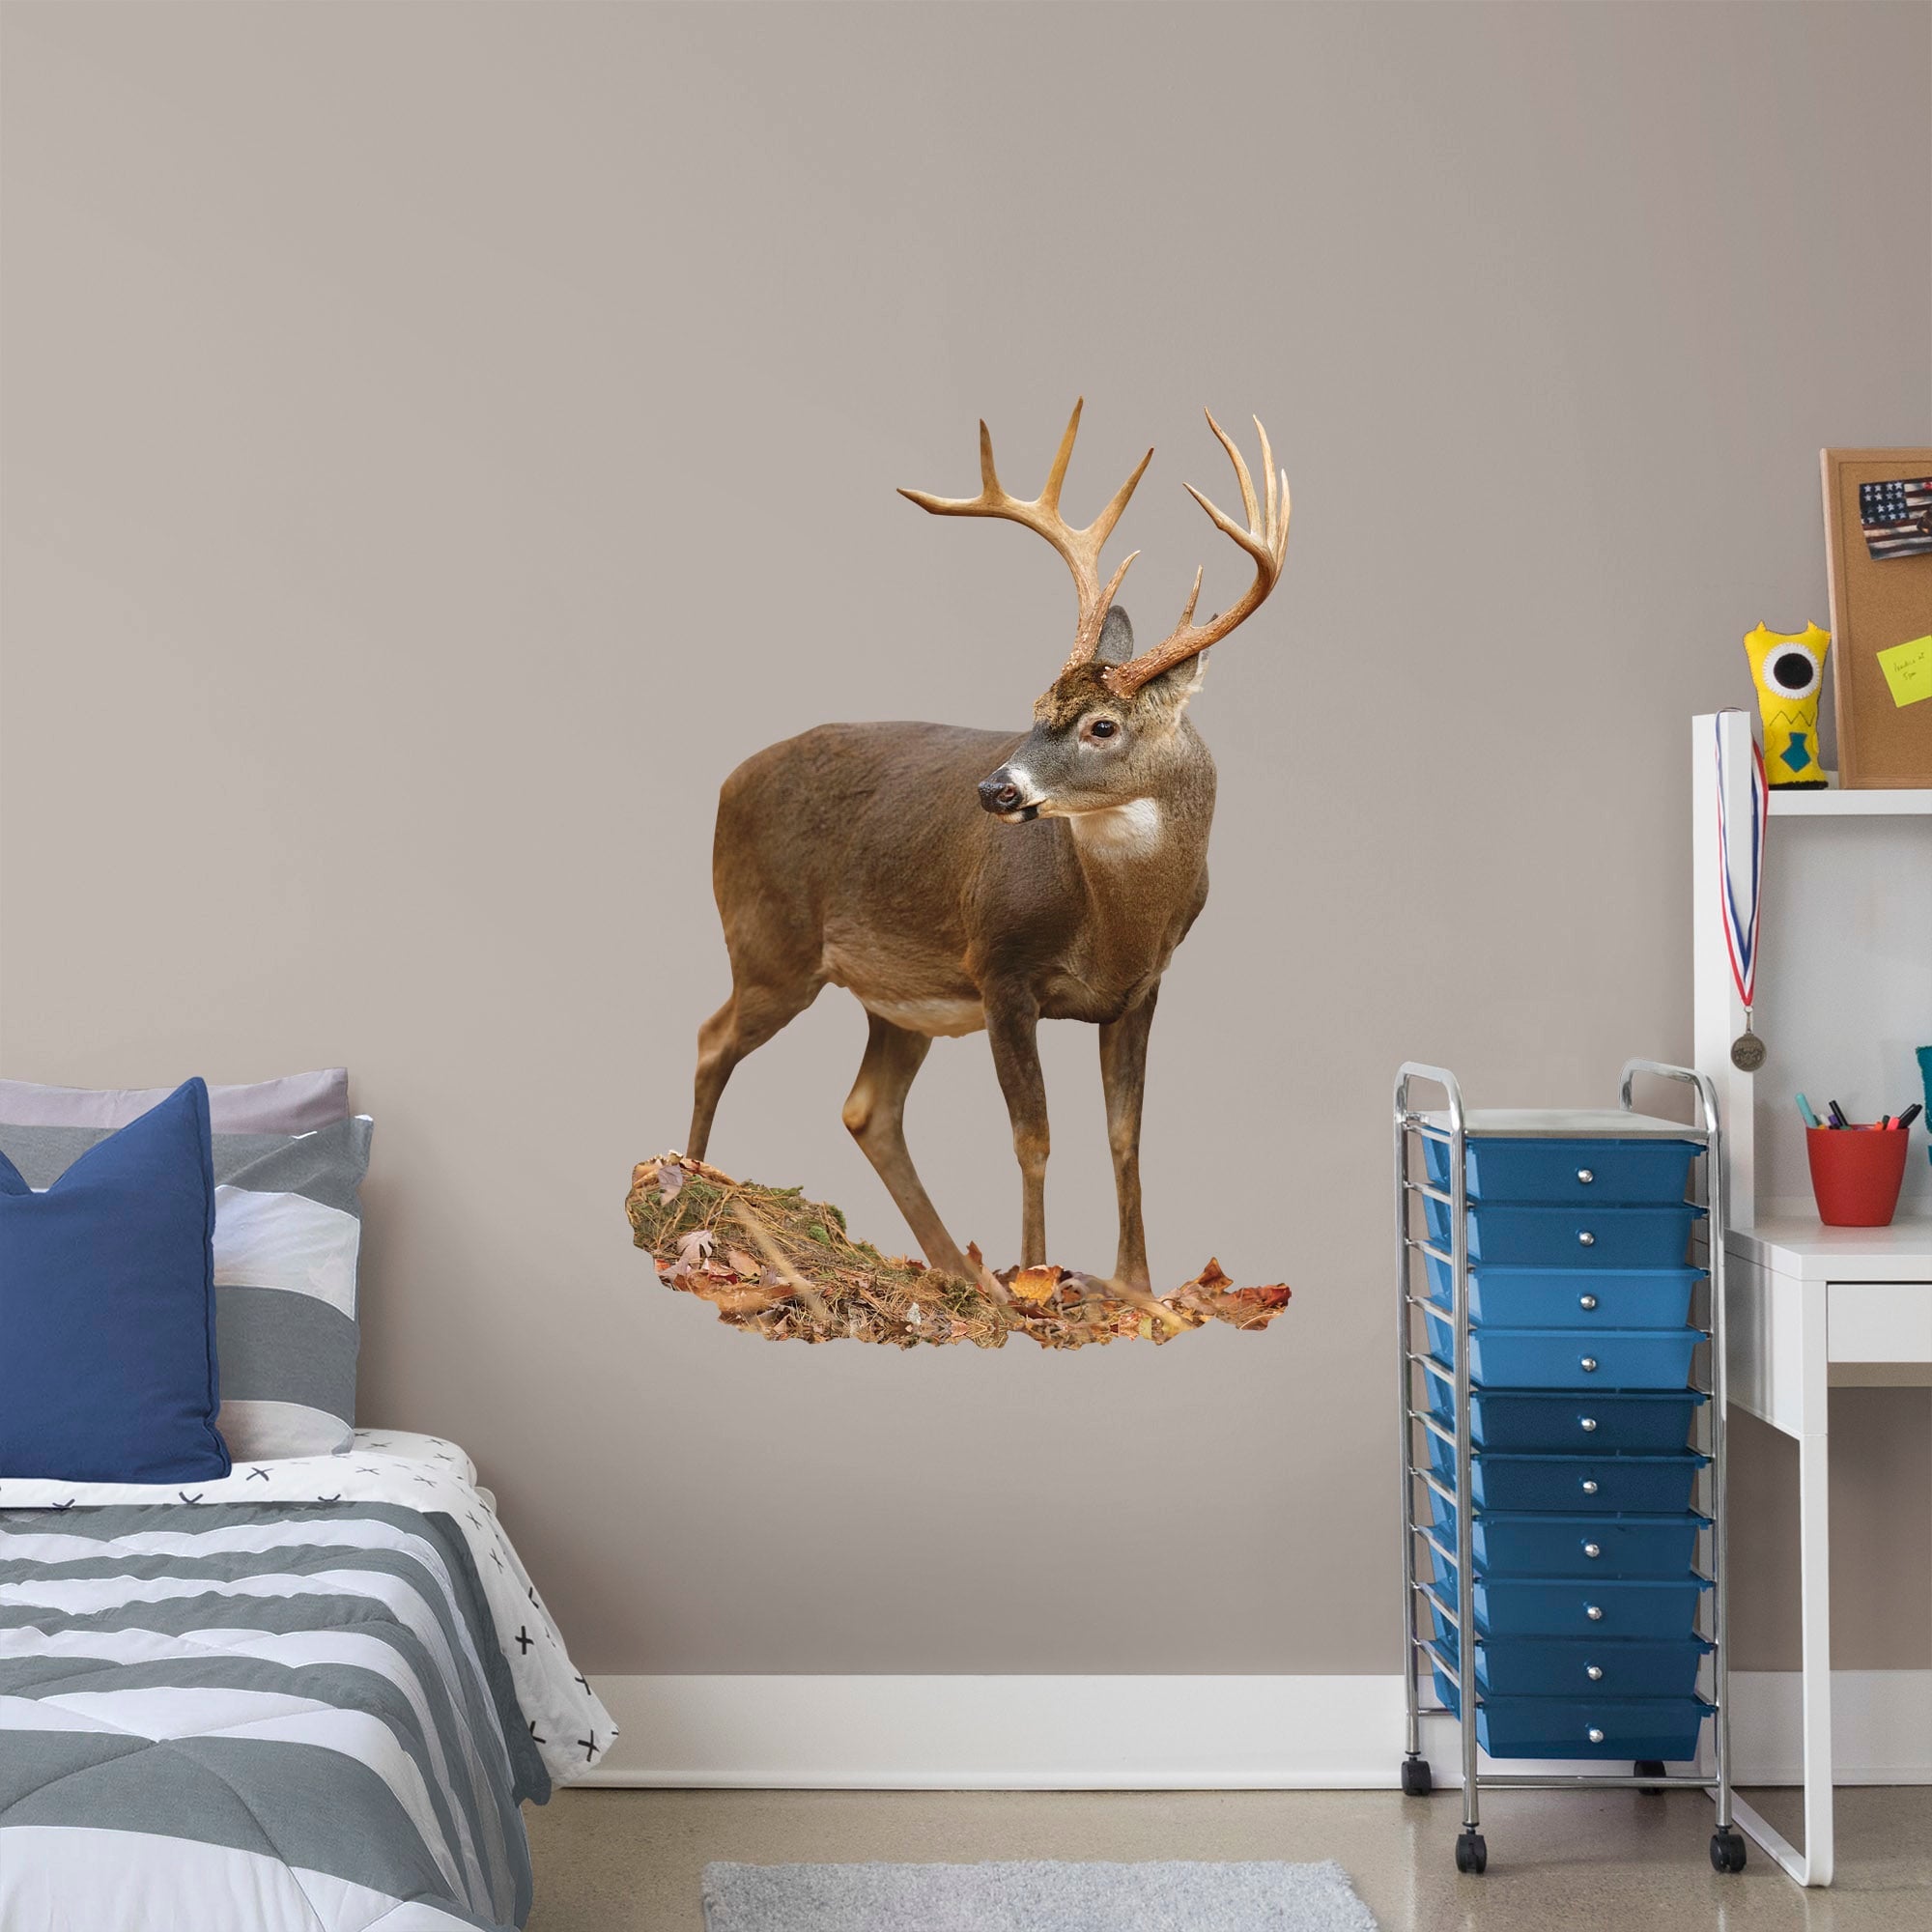 Deer - Removable Vinyl Decal Giant Animal + 2 Decals (36"W x 51"H) by Fathead | Wood/Vinyl